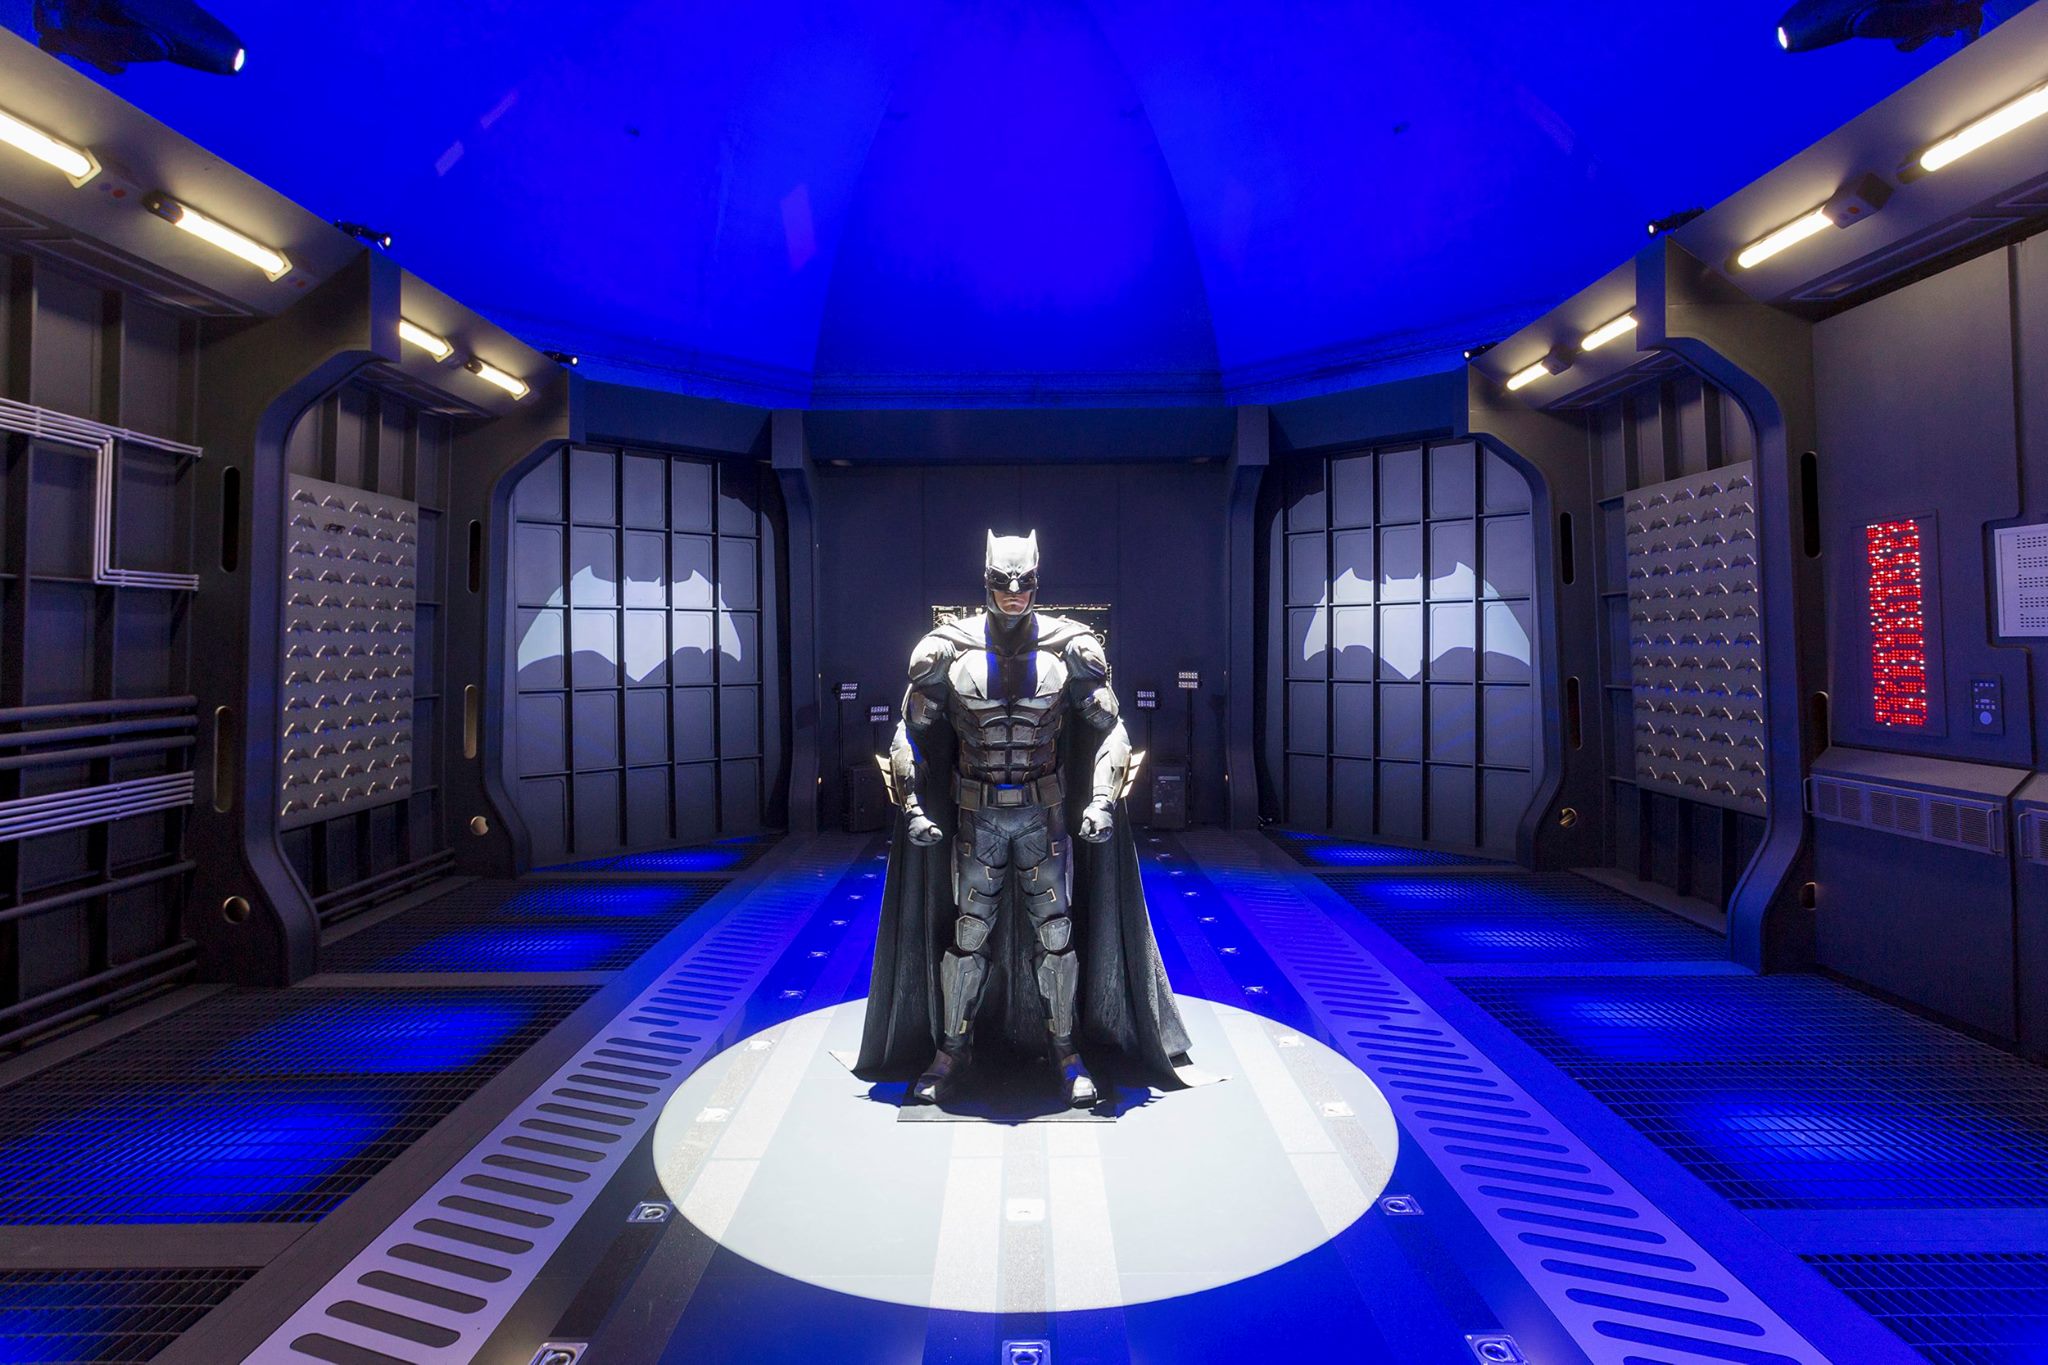 Justice League Experience in London